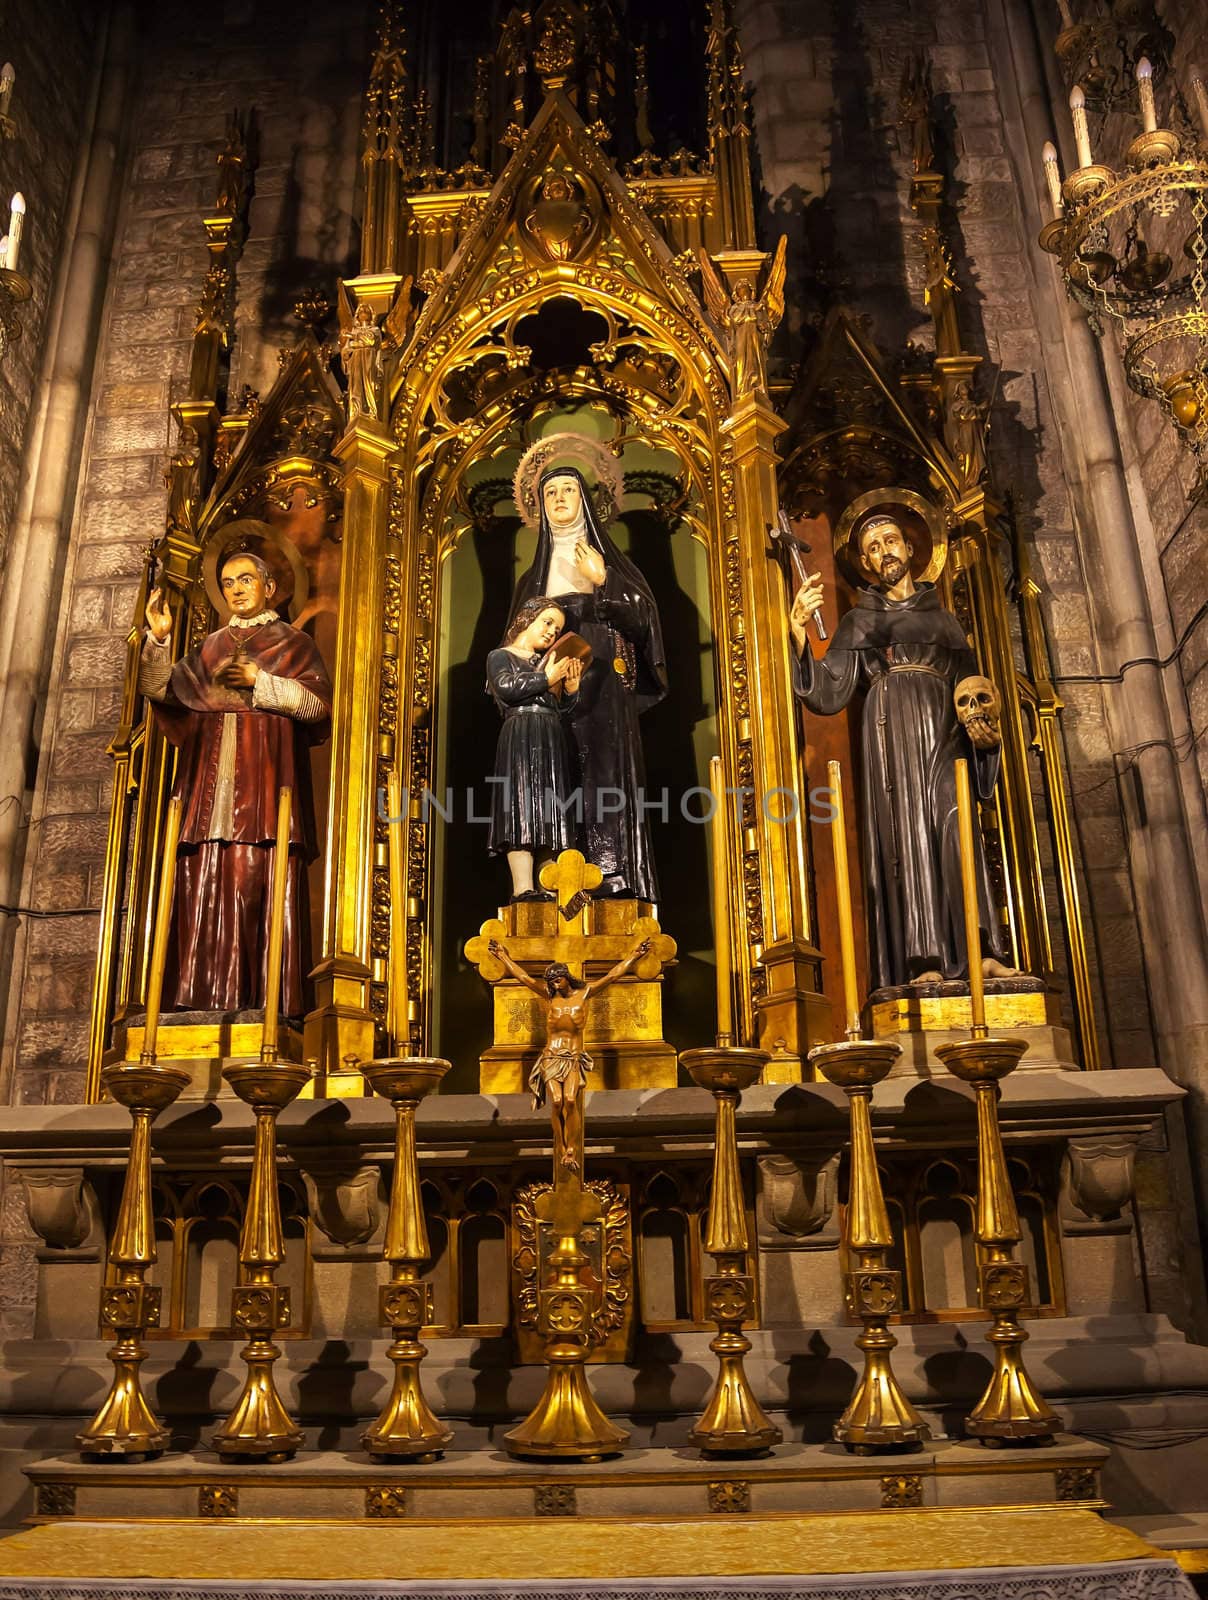 Saints Joaquima de Vedruna, Francis of Assisi, Anthony M. Claret, St Maria del Pi, Saint Mary of Pine Tree, Barcelona, Catalonia, Spain. St Joaquima, founder of Carmelit Sisters, and Saint Mary Claret was the confessor to Queen Isabella II of Spain.  Saint Maria del Pi, Saint Mary of the Pine Tree, church in Barceolona Spain, founded in 987 or earlier.